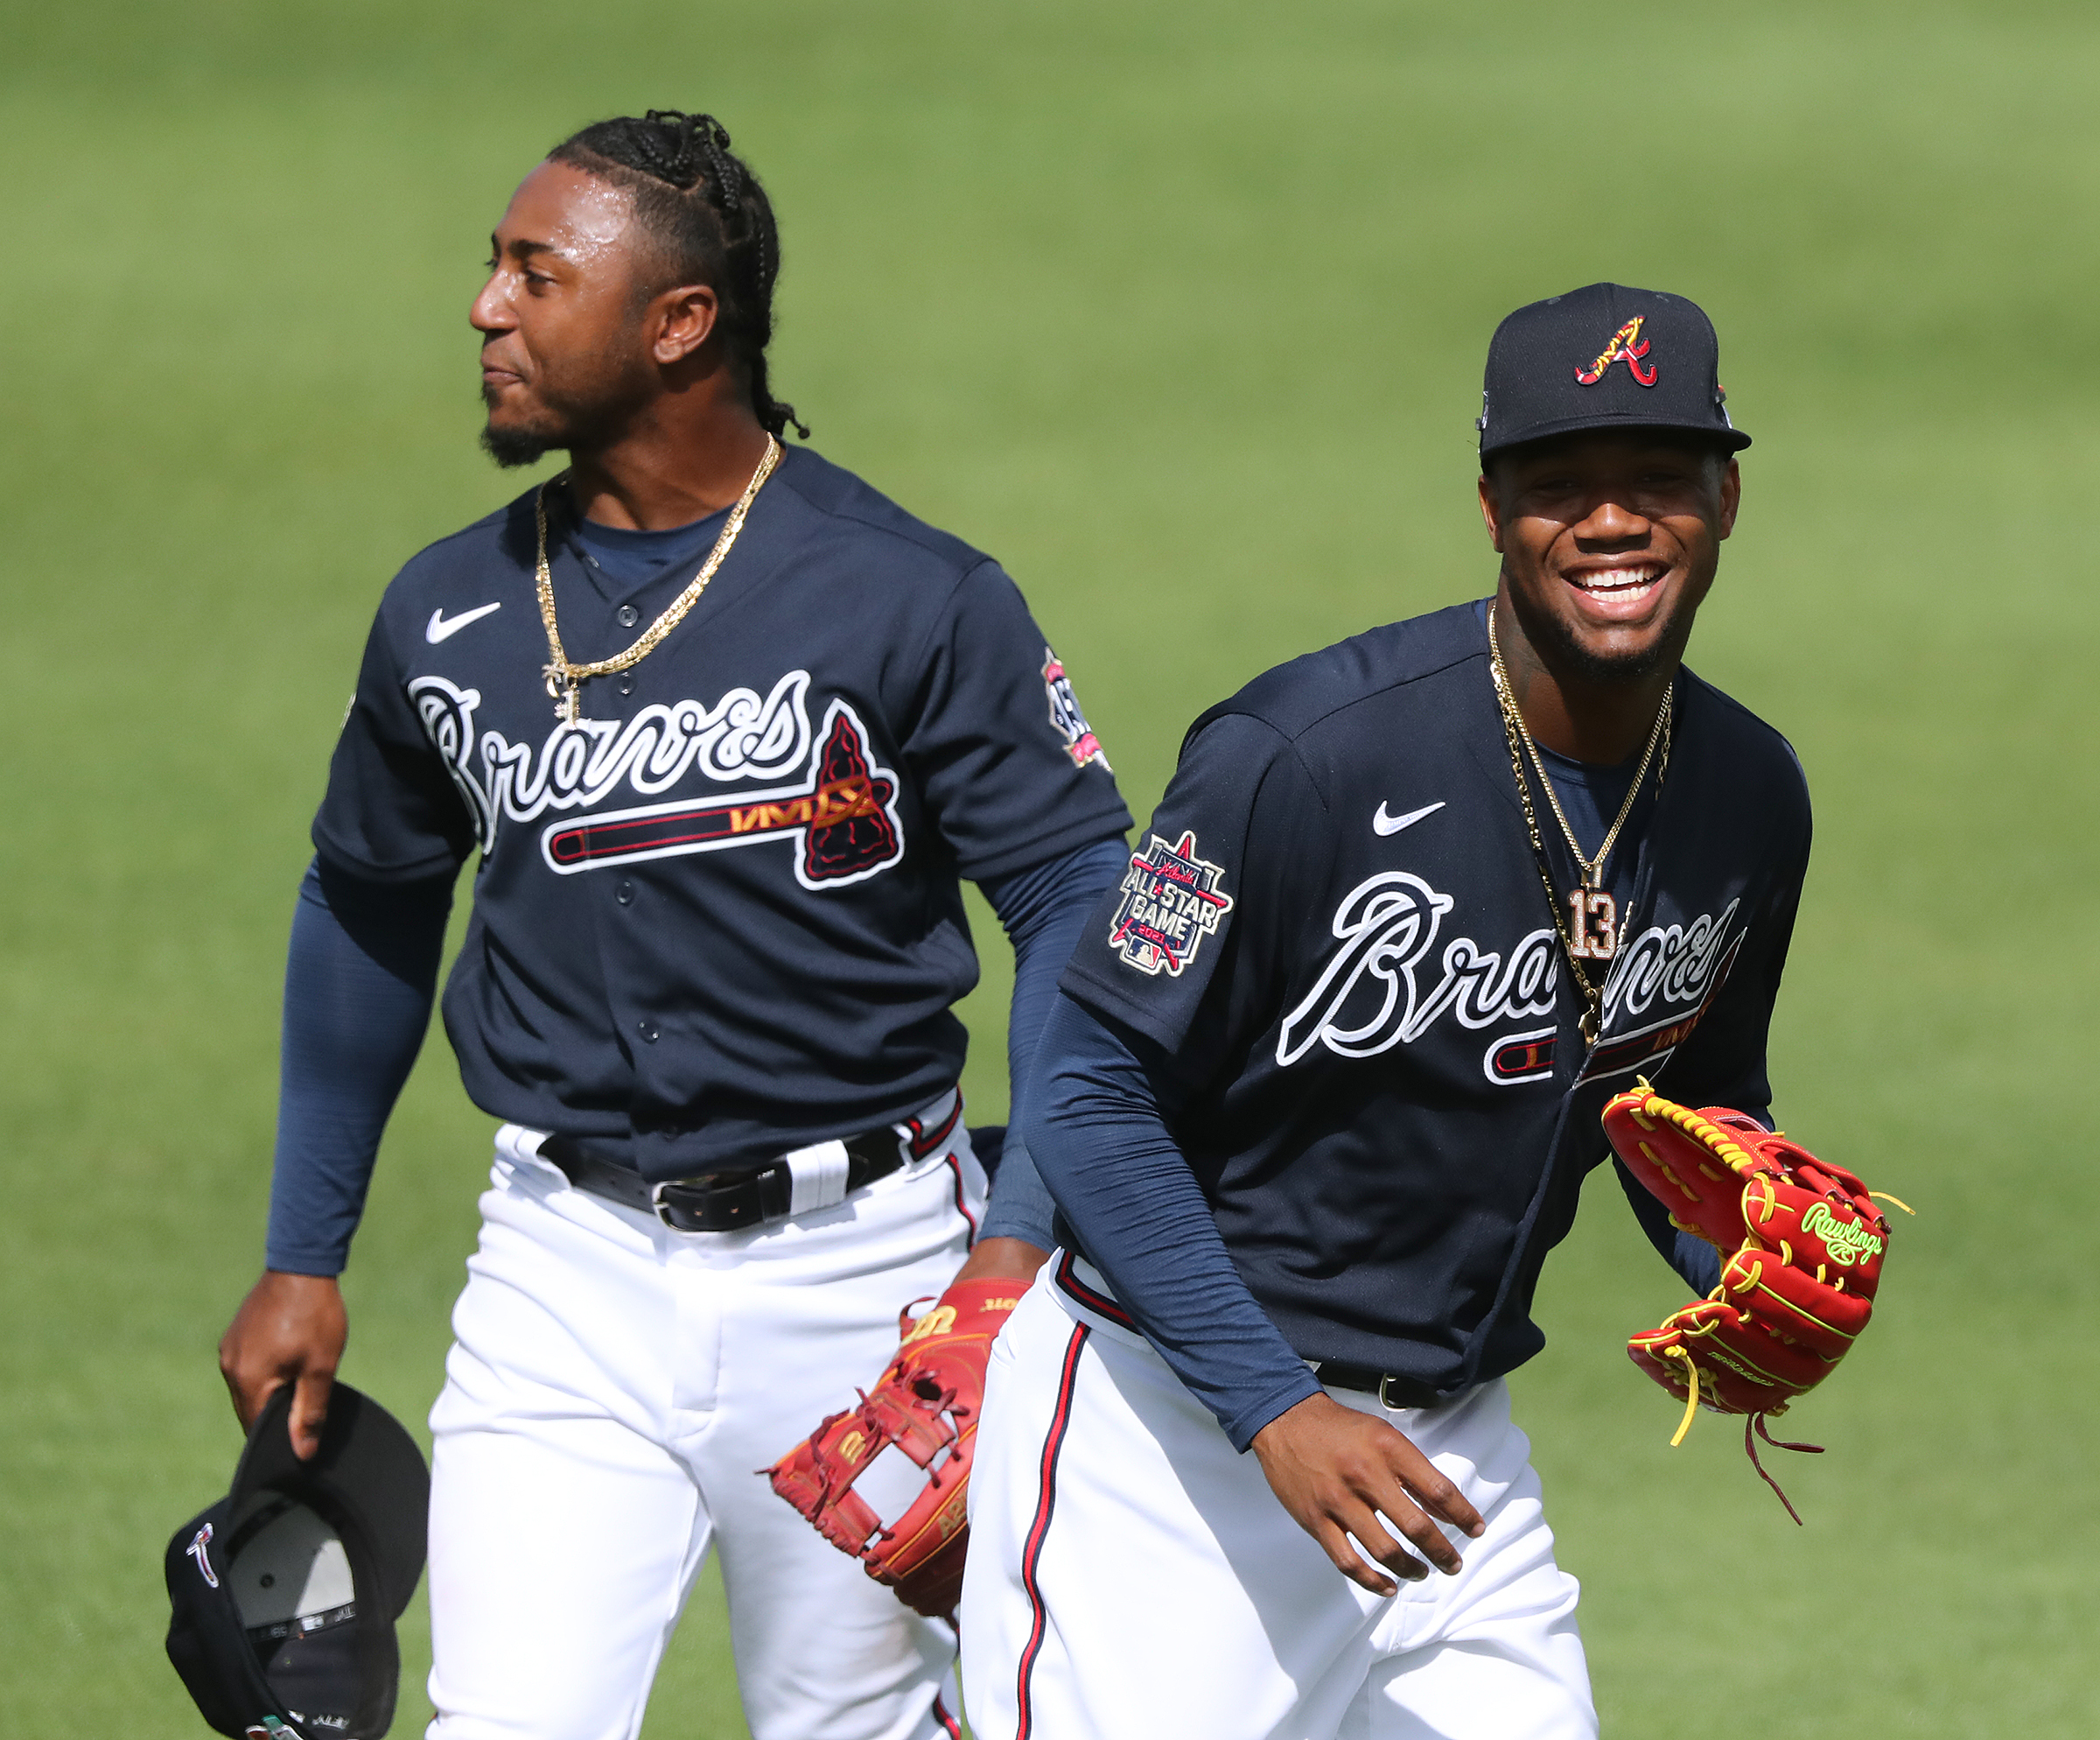 Who'll be on the Braves roster on opening day?